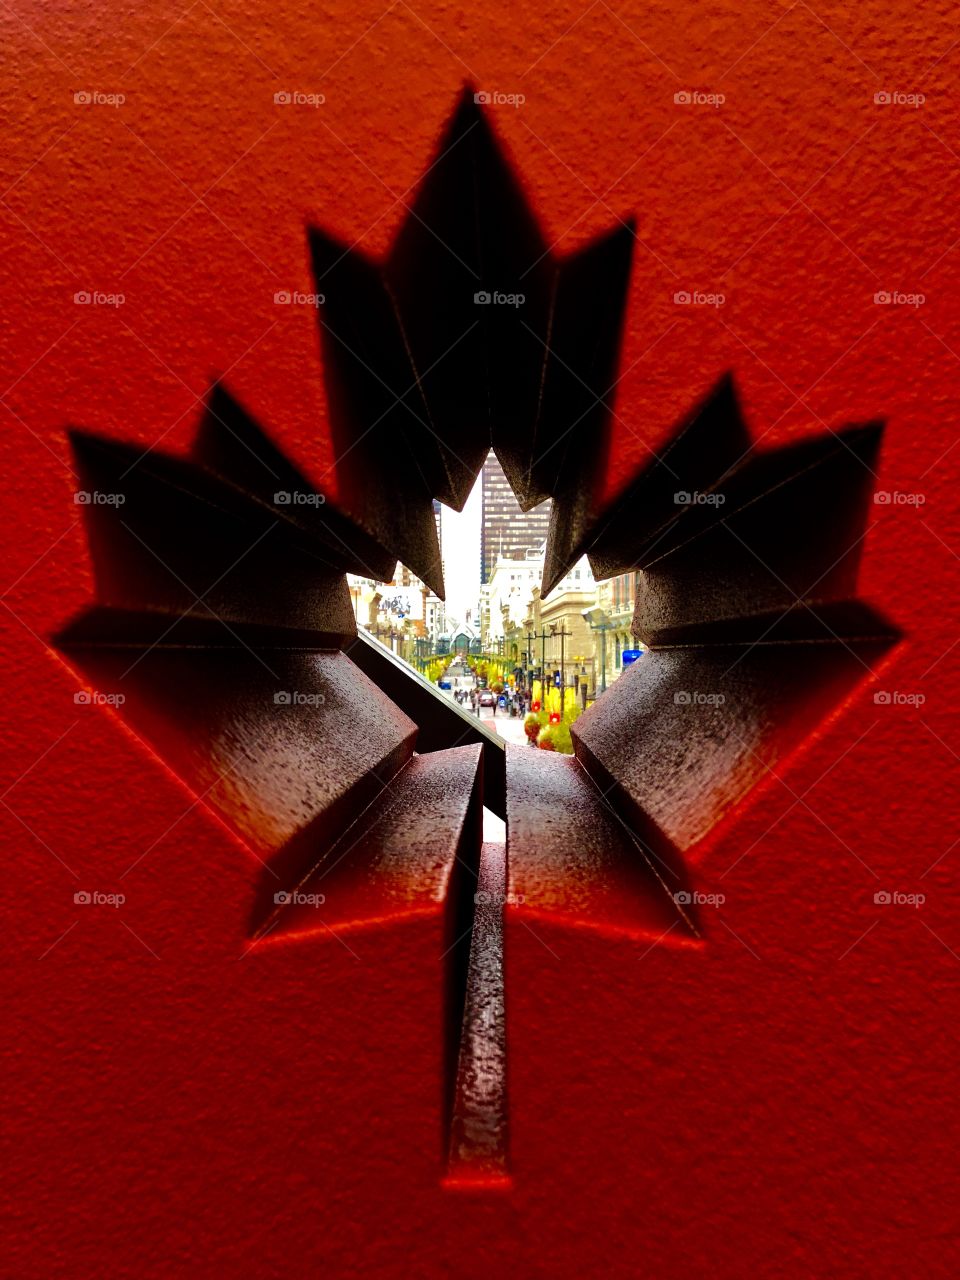 Inside look into a Canadian maple leaf city